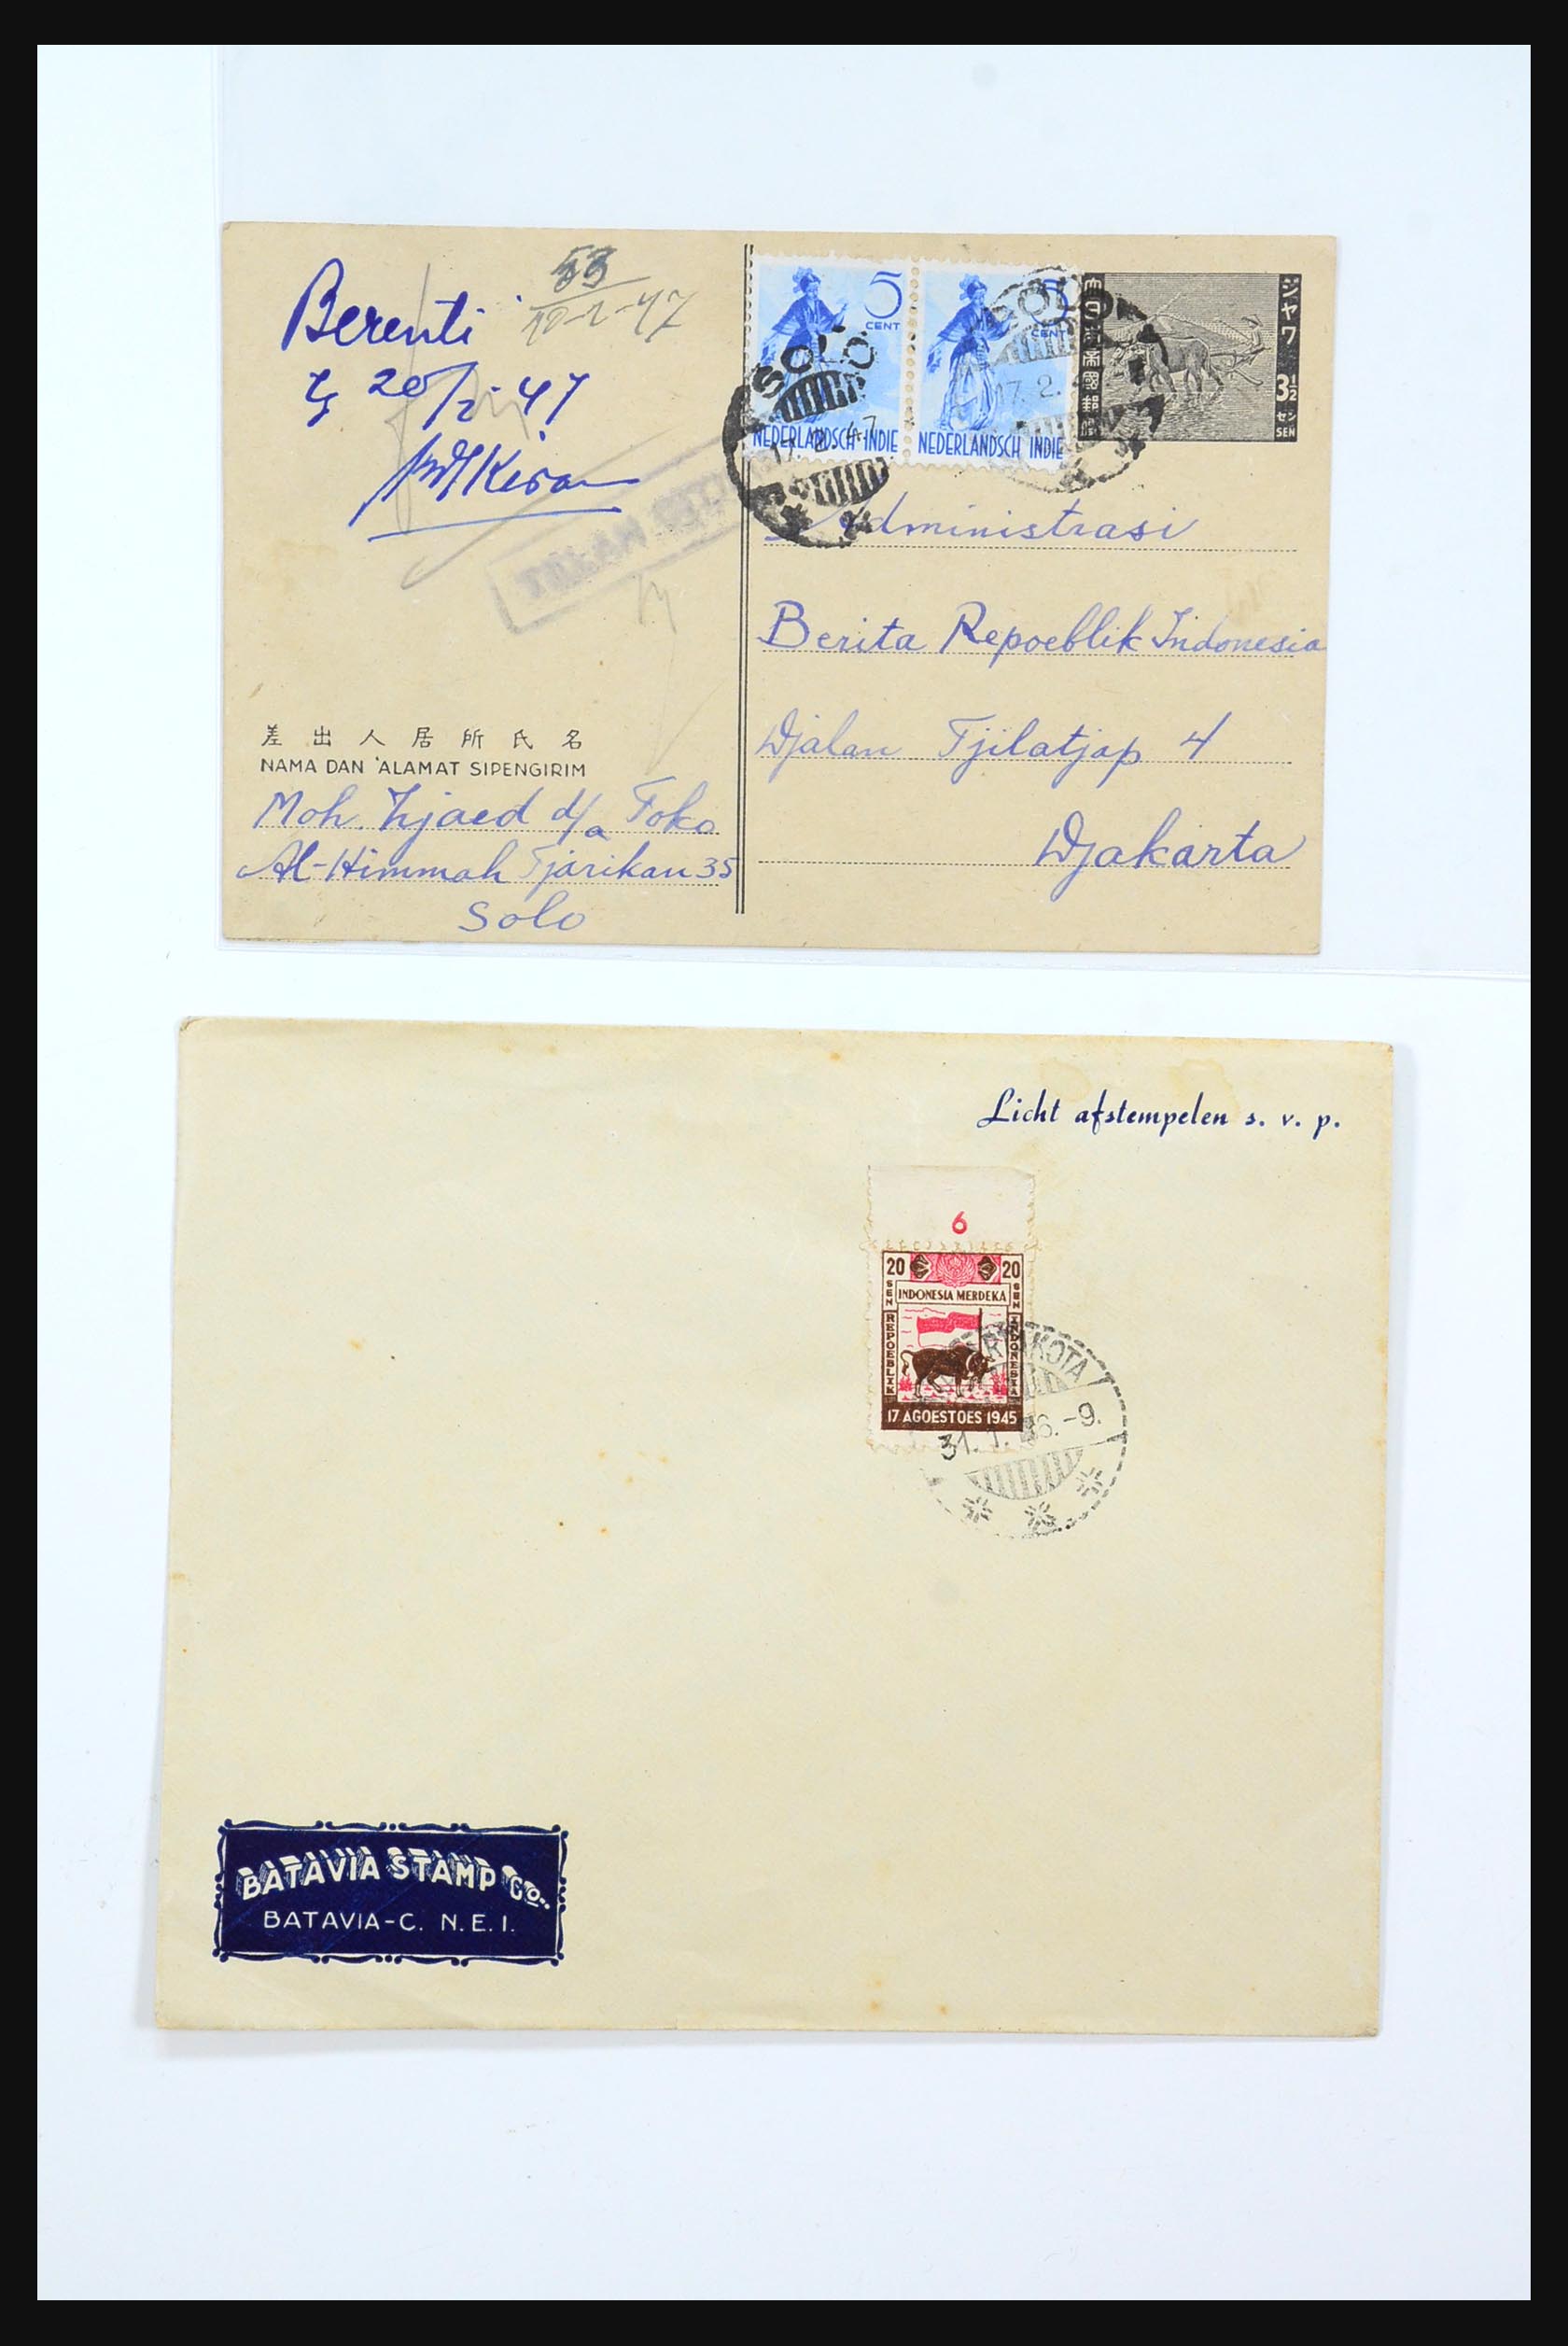 31362 022 - 31362 Netherlands Indies Japanese occupation covers 1942-1945.